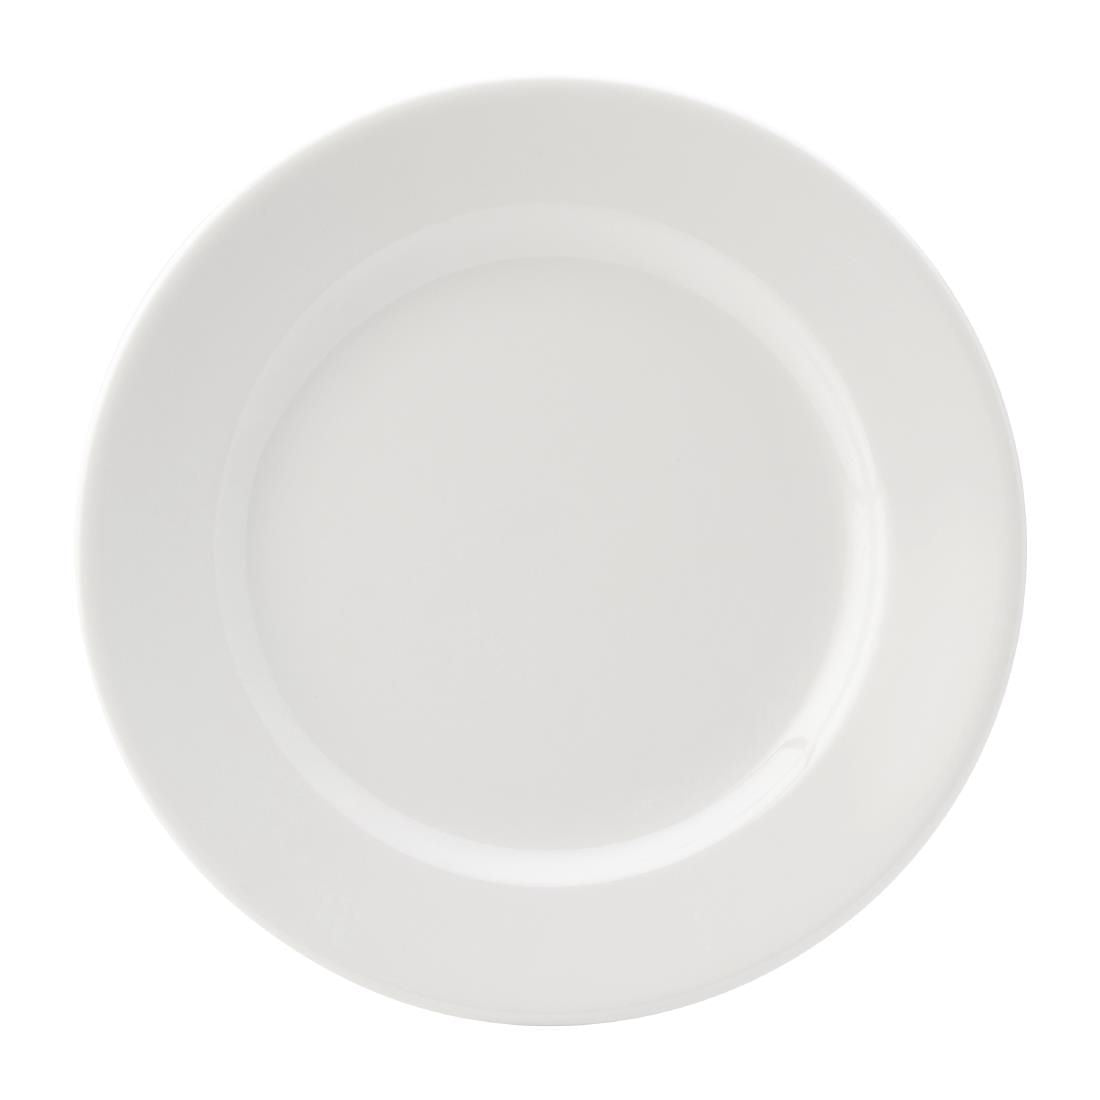 Utopia Titan Winged Plates White 230mm (Pack of 24)